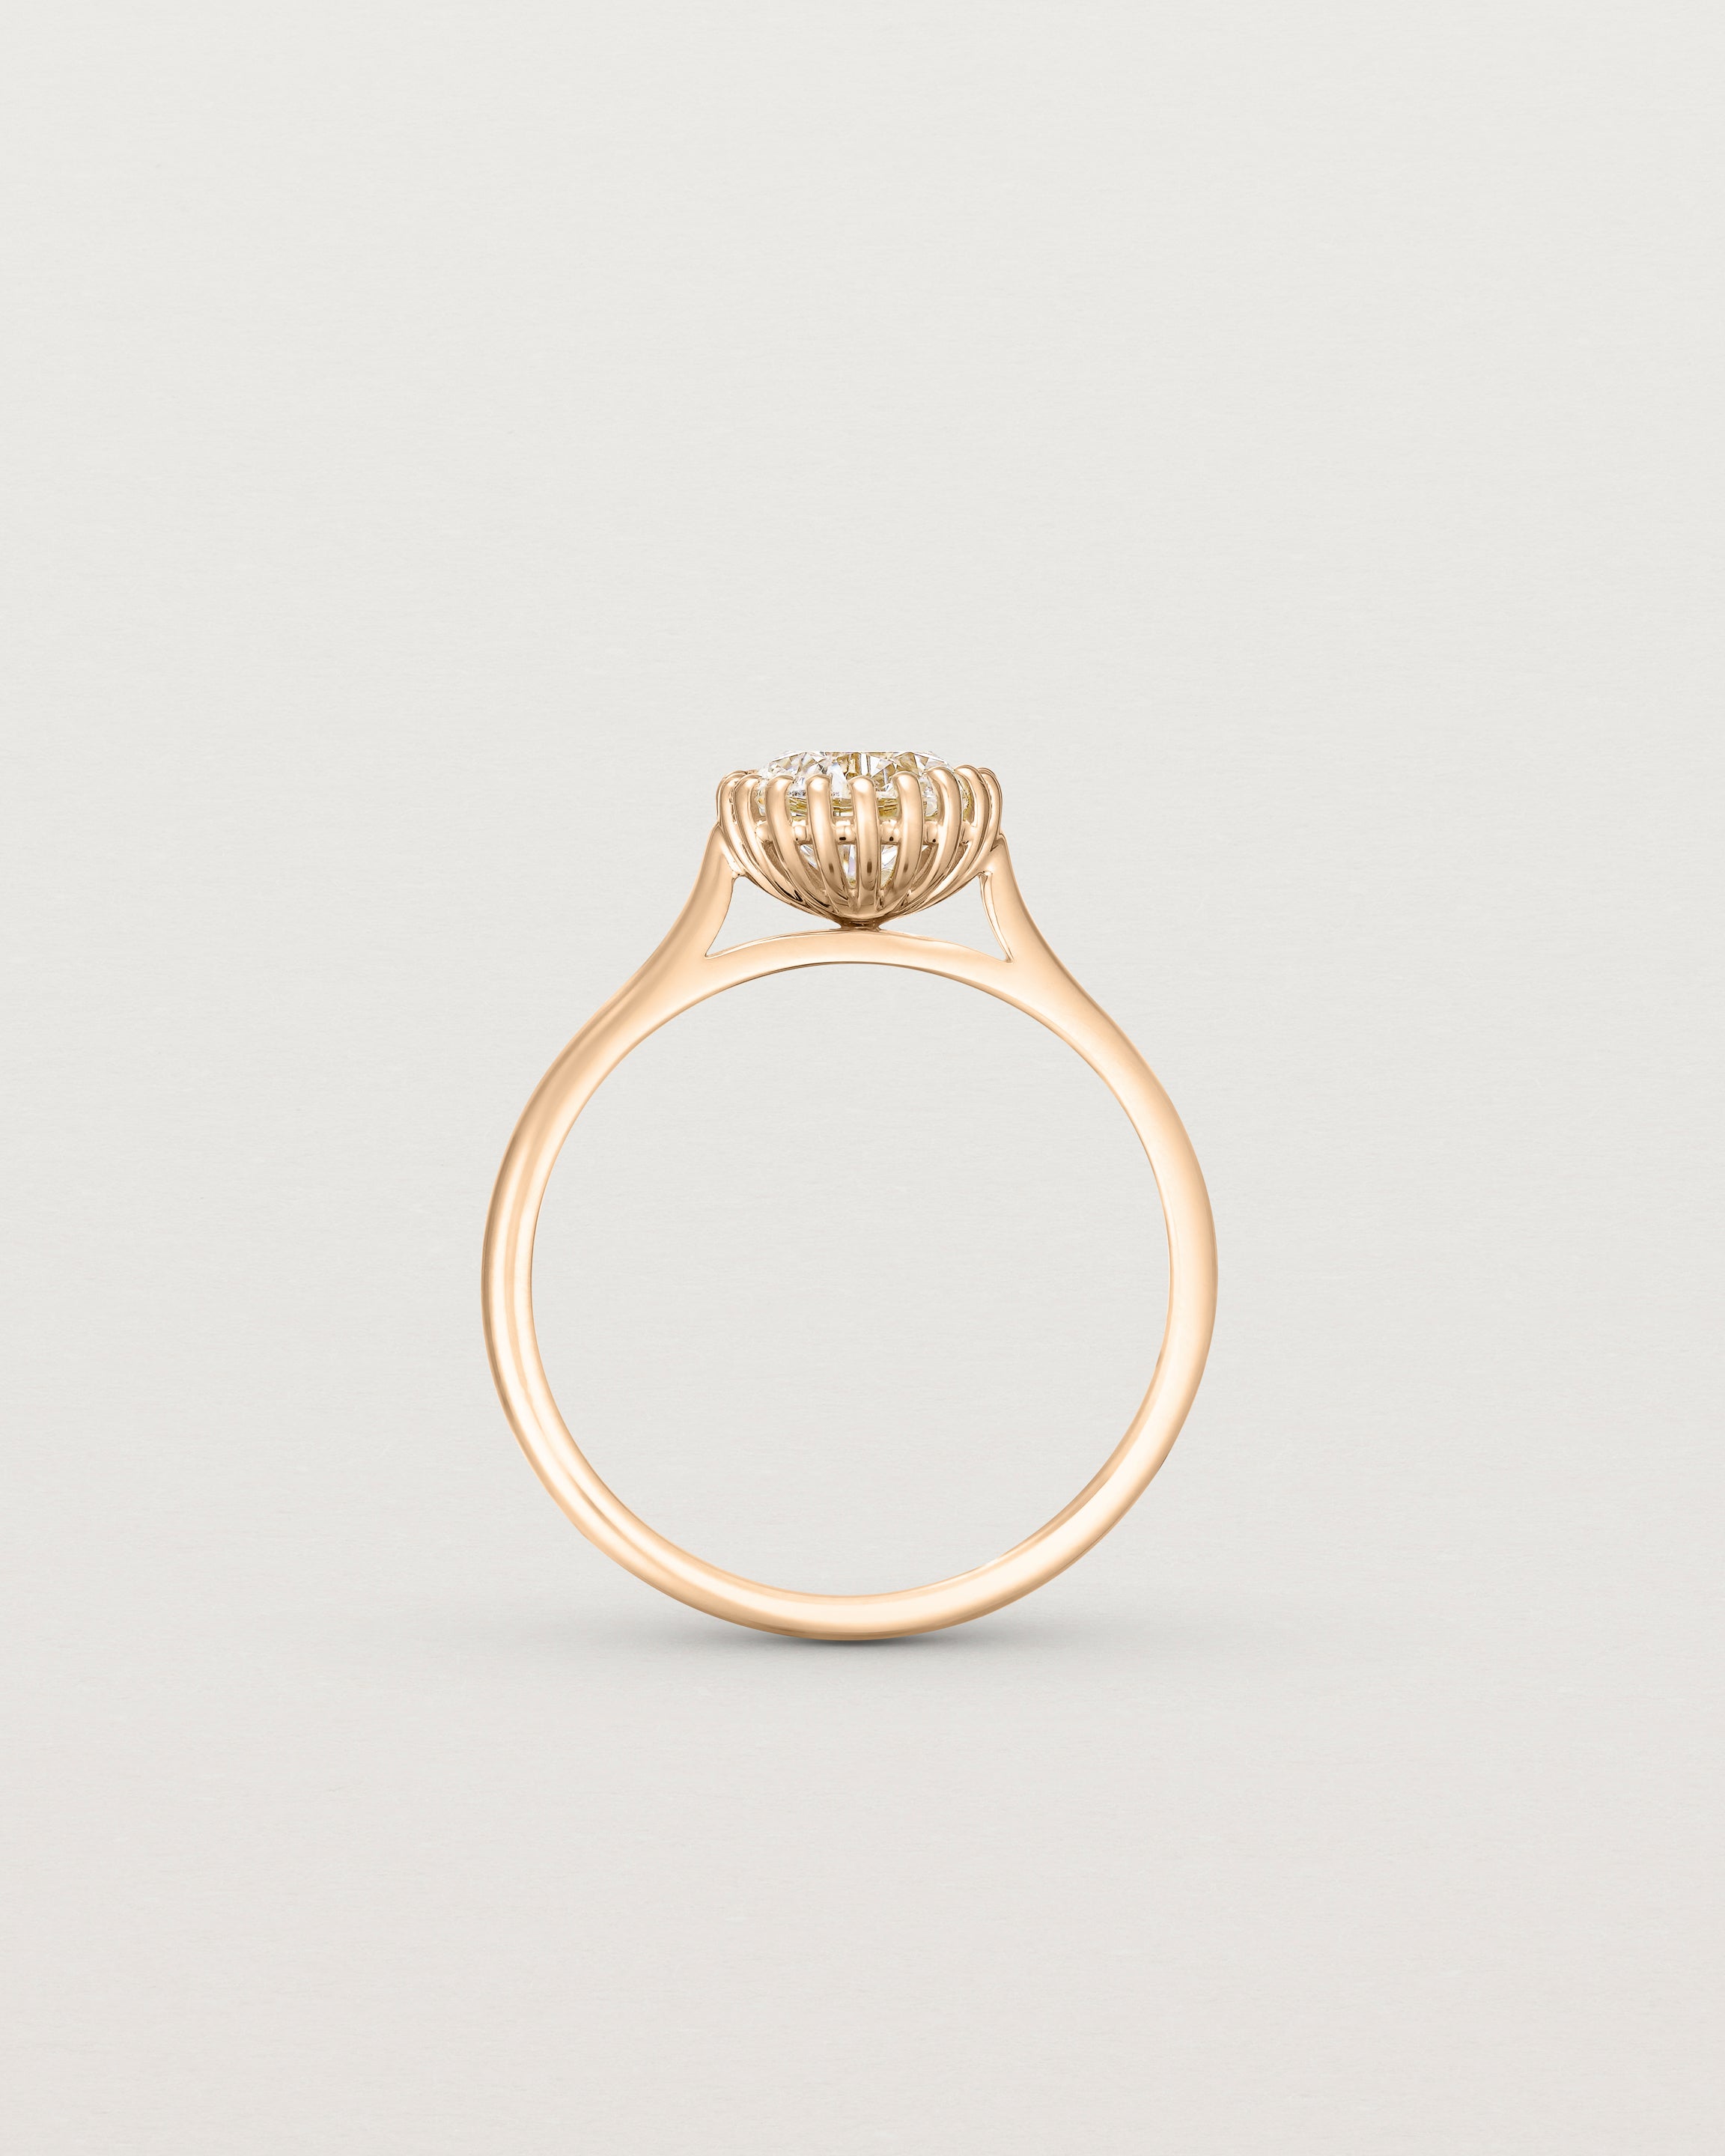 Standing view of the Meroë Round Solitaire | Laboratory Grown Diamond in rose gold.